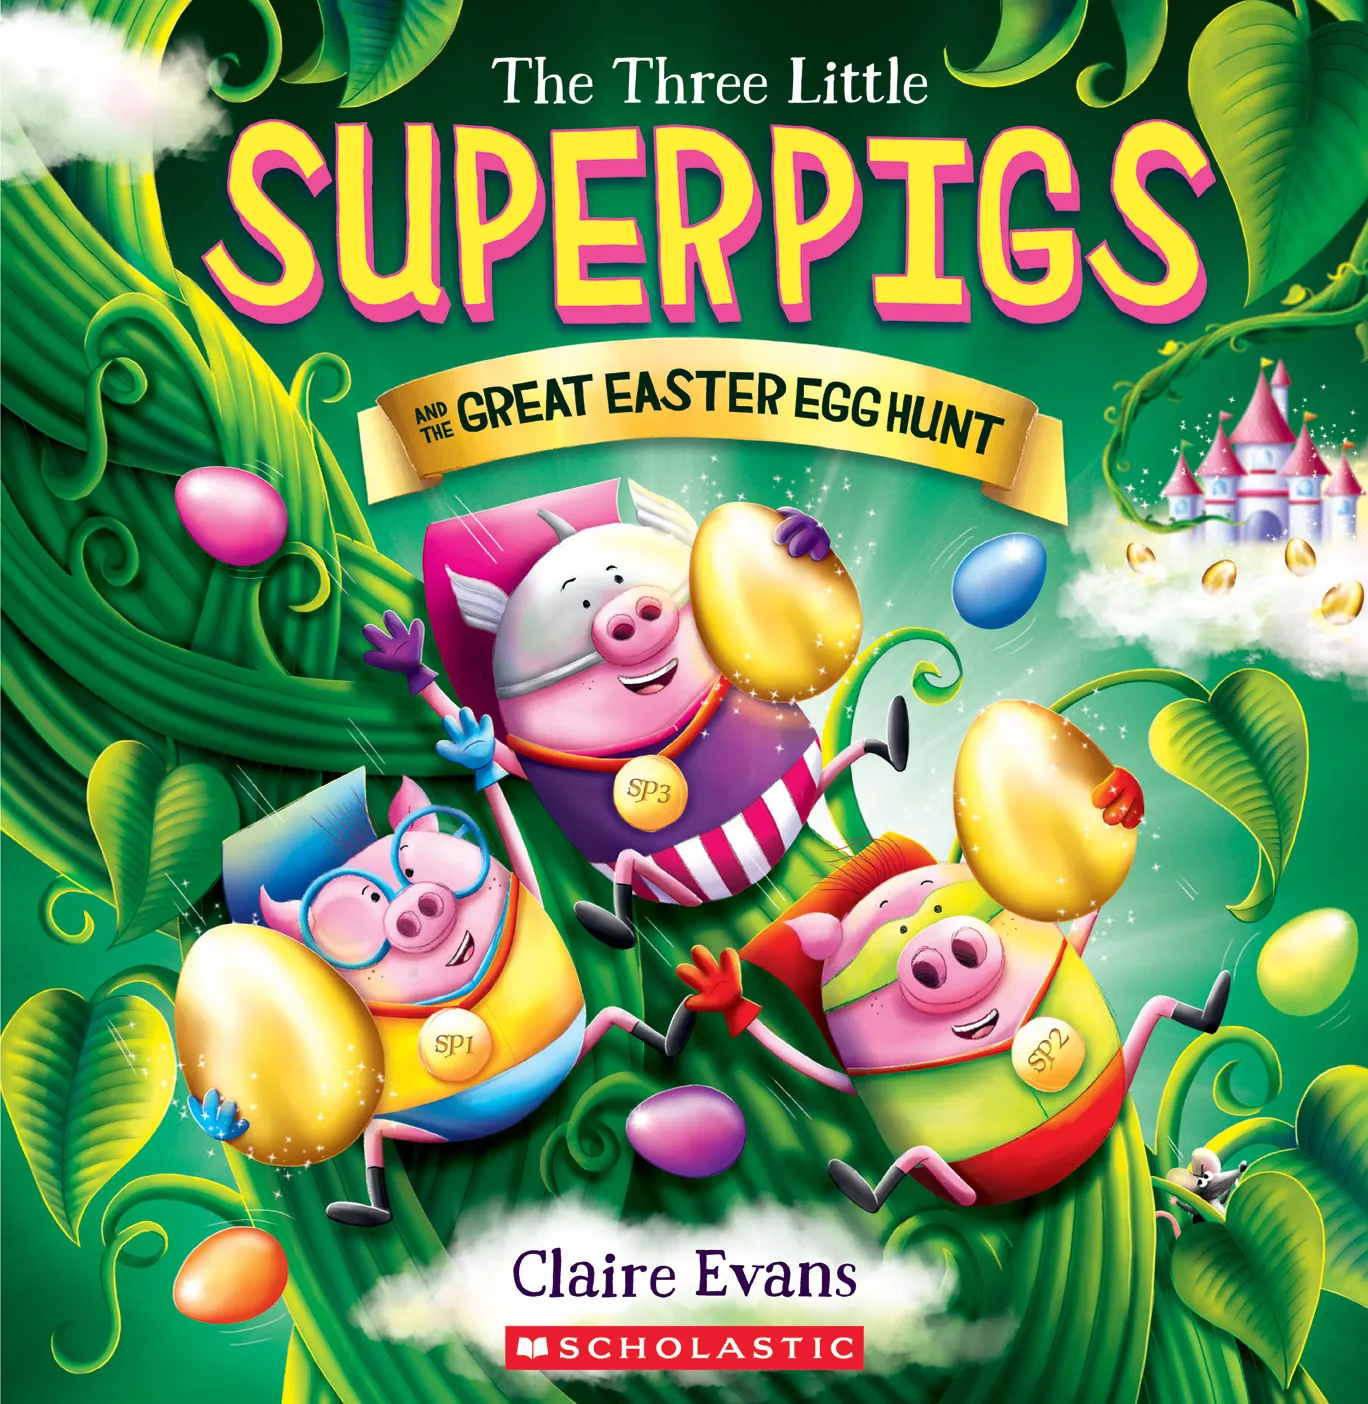 The Three Little Superpigs and the Great Easter Egg Hunt (The Three Little Superpigs)